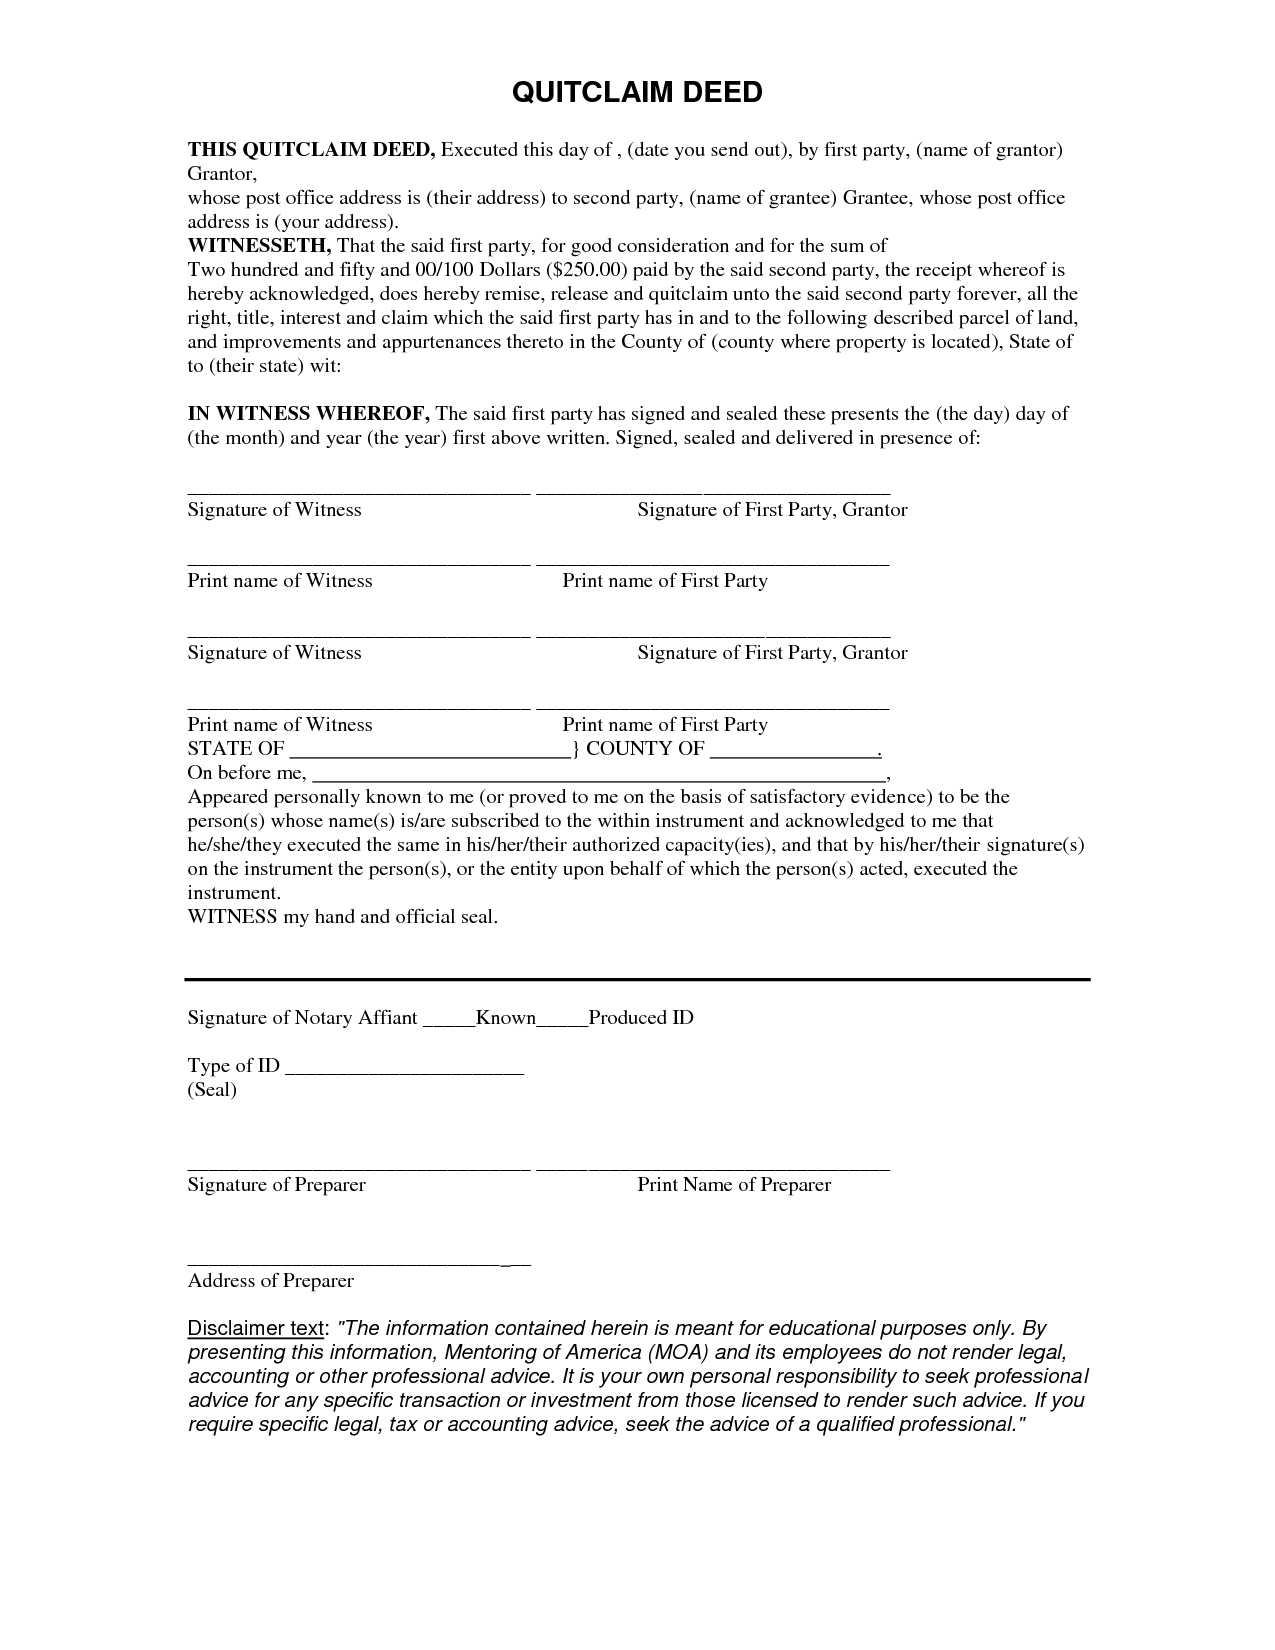 Free Quit Claim Deed Form - Quit Form | Real State | Legal Forms - Free Printable Quit Claim Deed Form